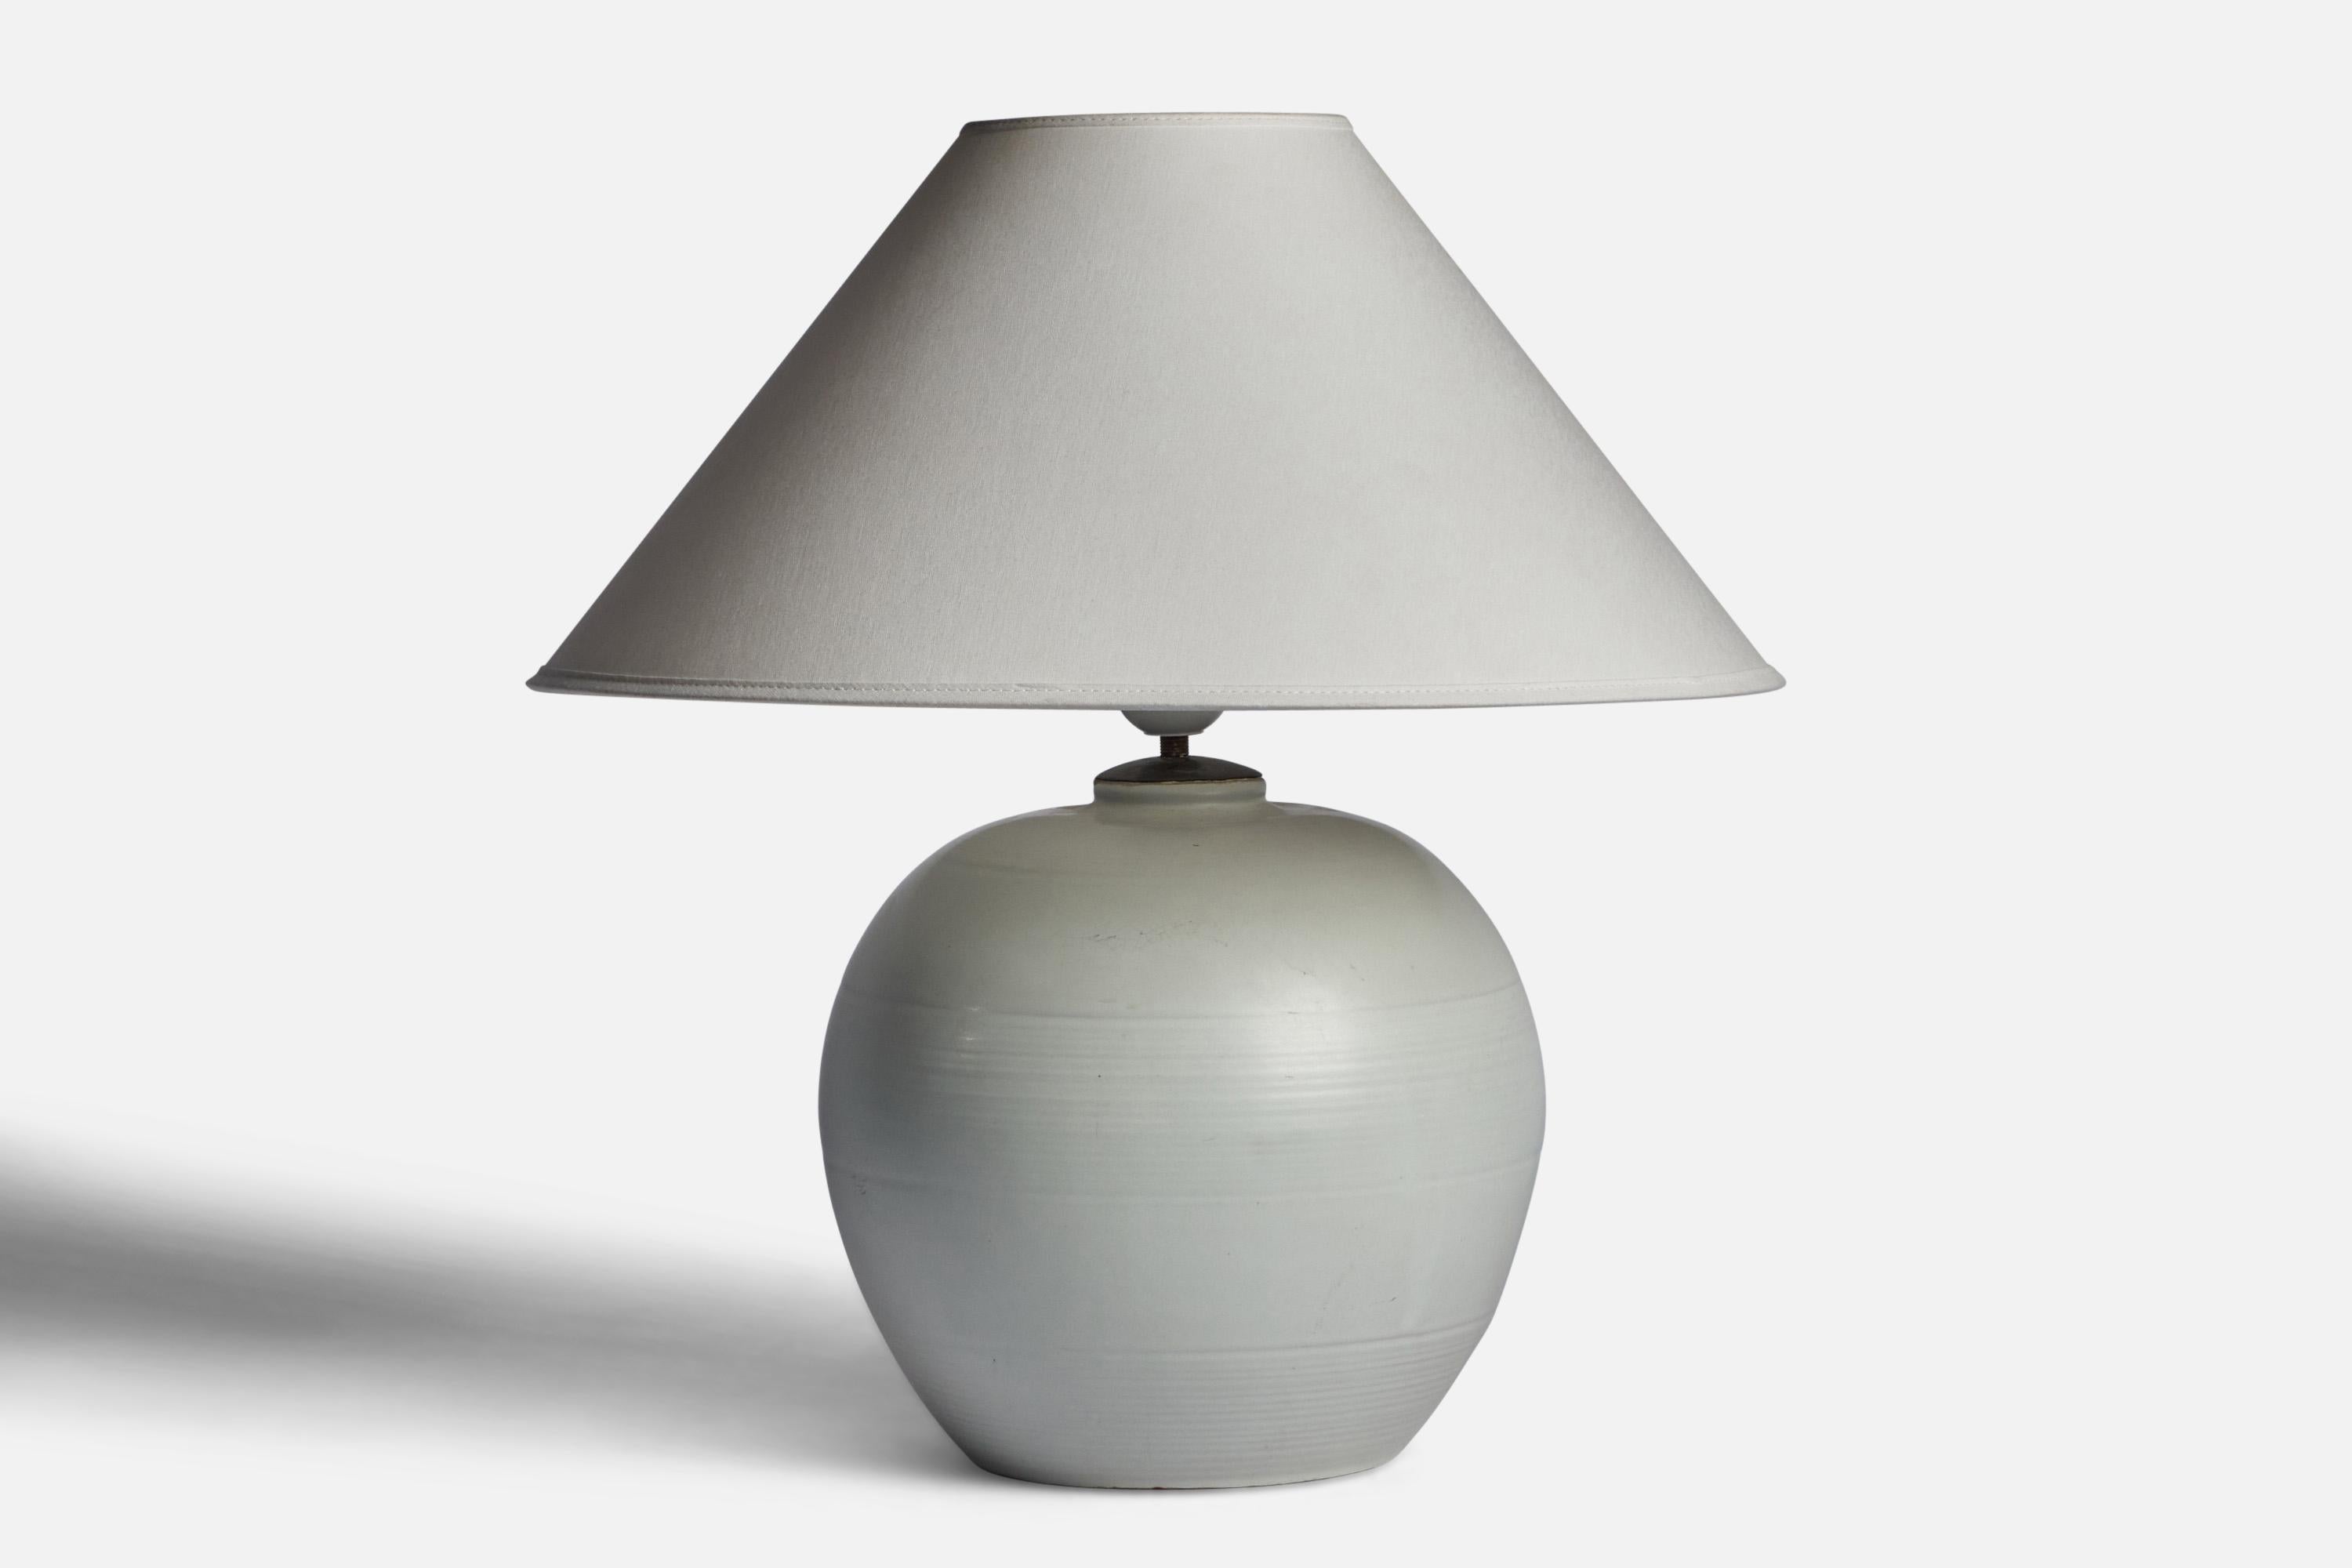 An off-white table lamp designed by Anna-Lisa Thomson and produced by Upsala Ekeby, Sweden, 1930s.

“EKEBY 3154” stamp on bottom

Dimensions of Lamp (inches): 12” H x 9.5” Diameter
Dimensions of Shade (inches): 4.5” Top Diameter x 15.75” Bottom